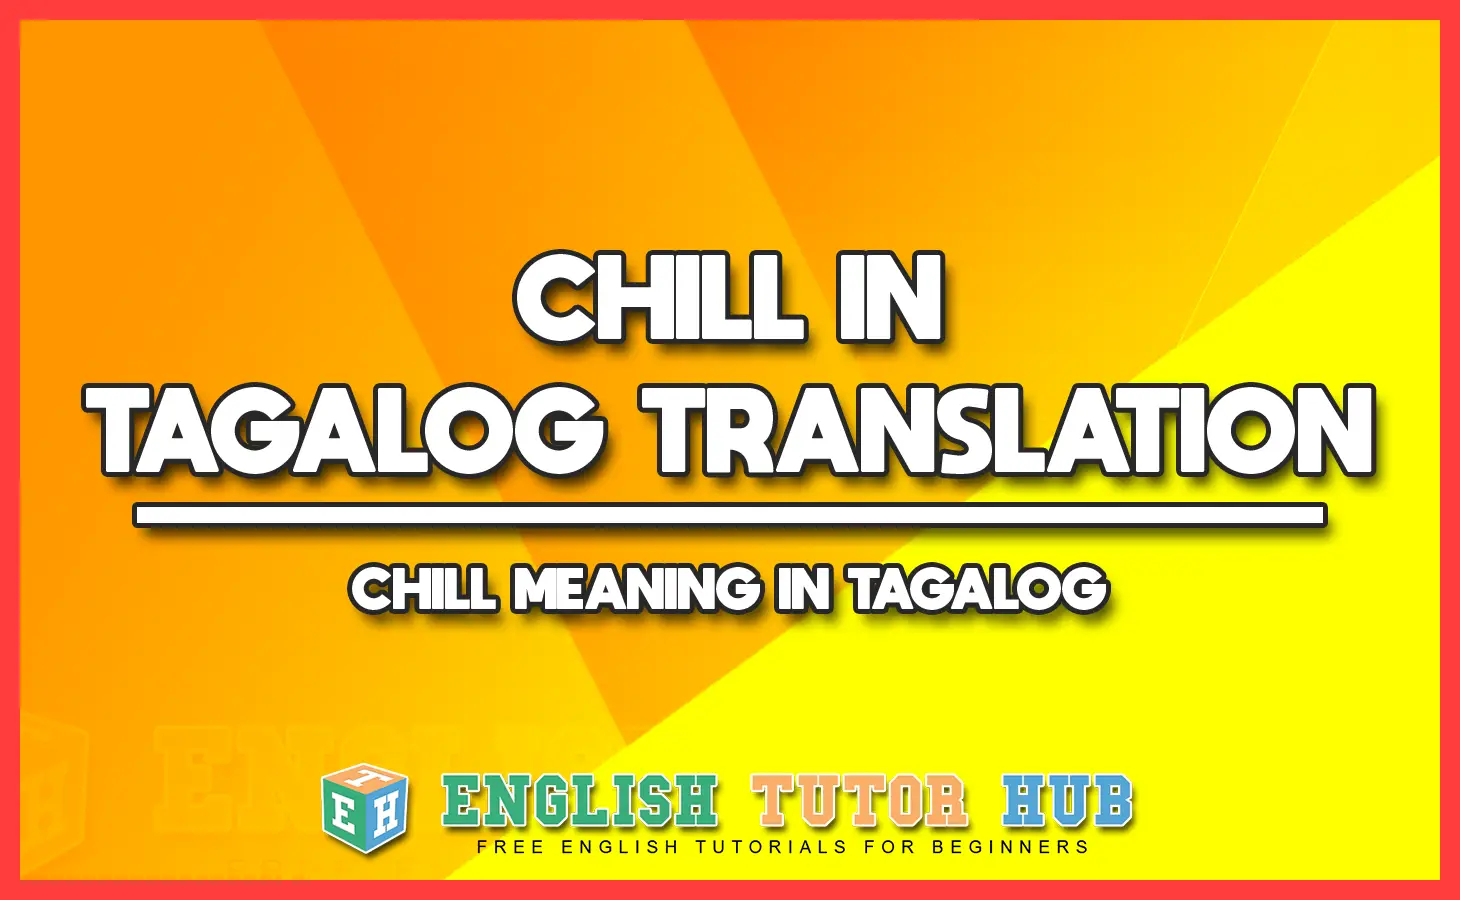 CHILL IN TAGALOG TRANSLATION - CHILL MEANING IN TAGALOG